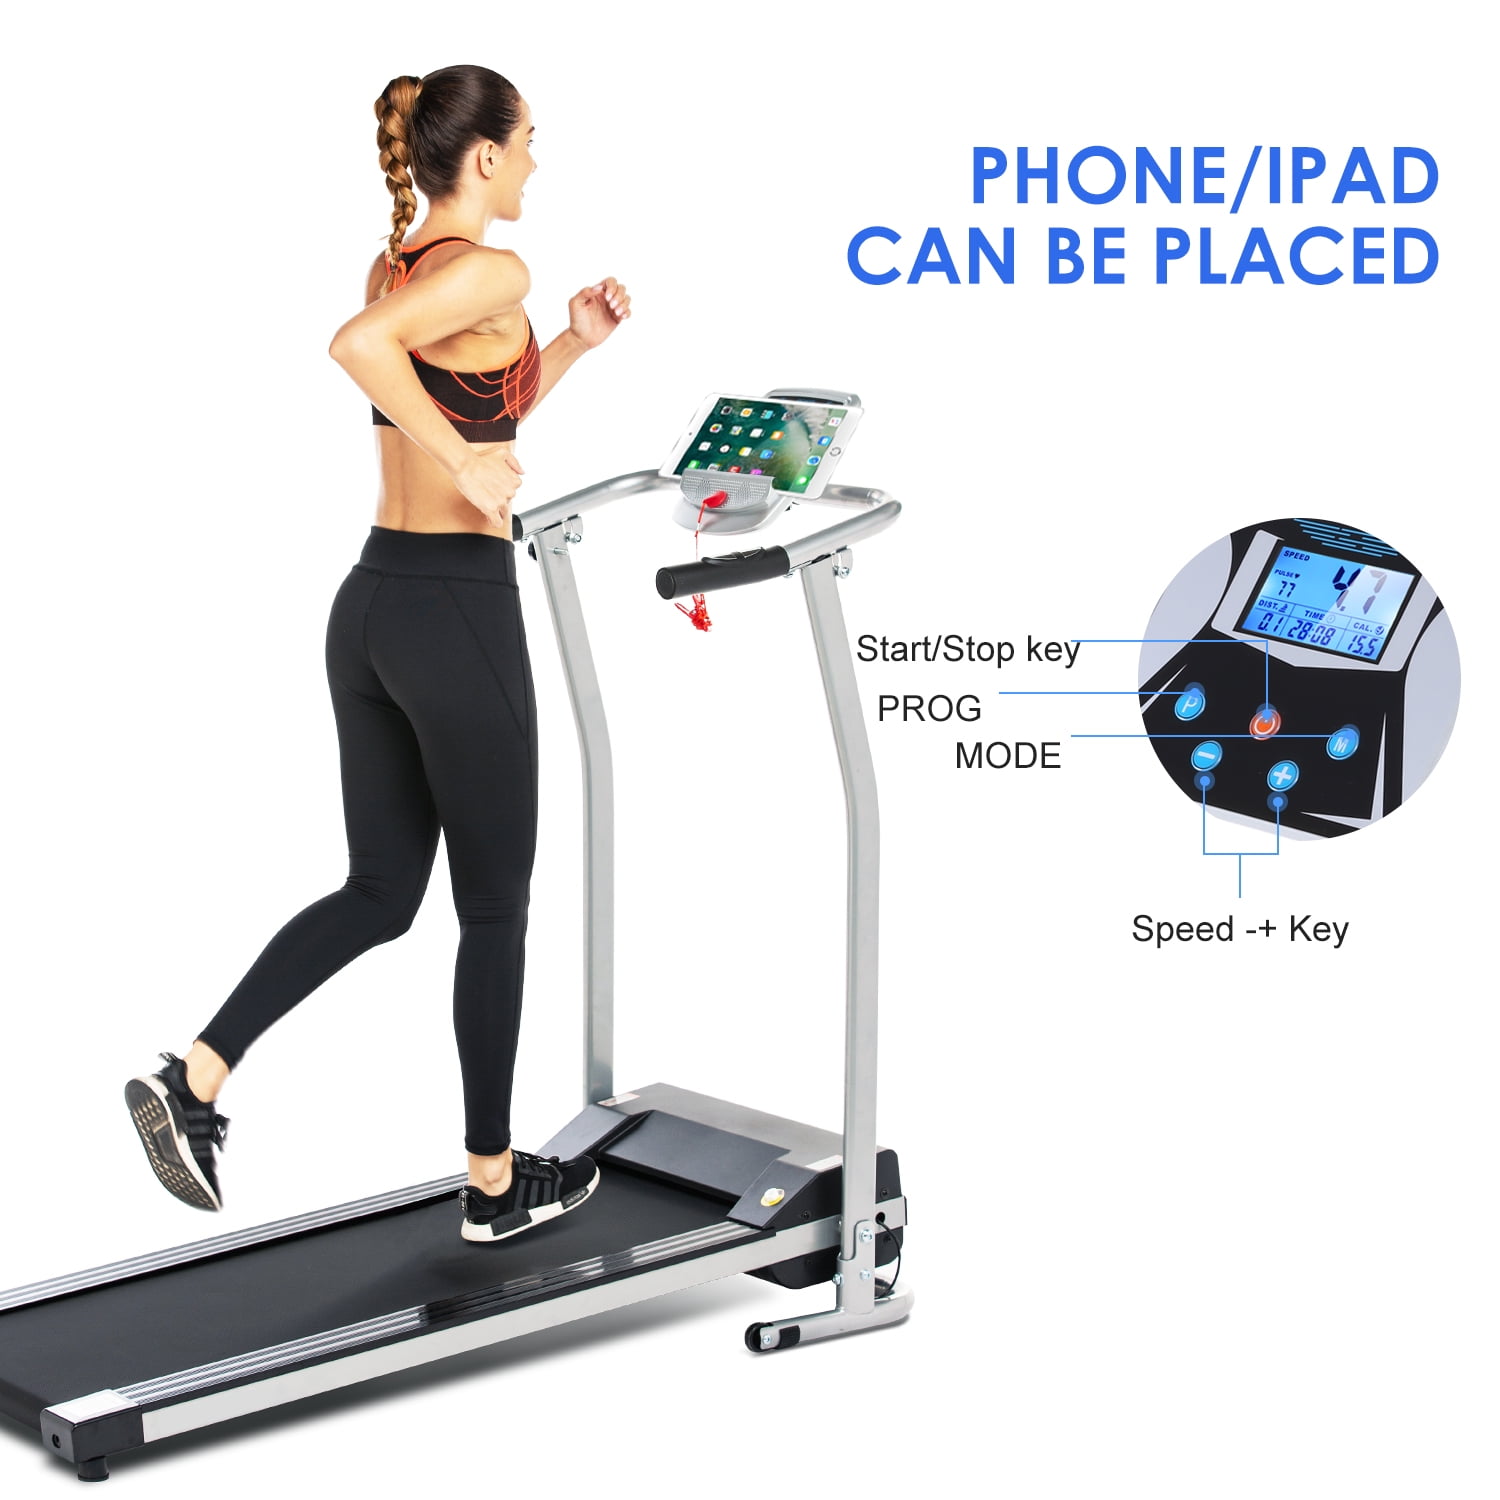 Folding Treadmill Easy Assembly Ultra-Thin Portable Non-Motorized Running and Walking Treadmill for Home Gym Home Workouts Walking Exercise cobcob Running Machine Jogging 